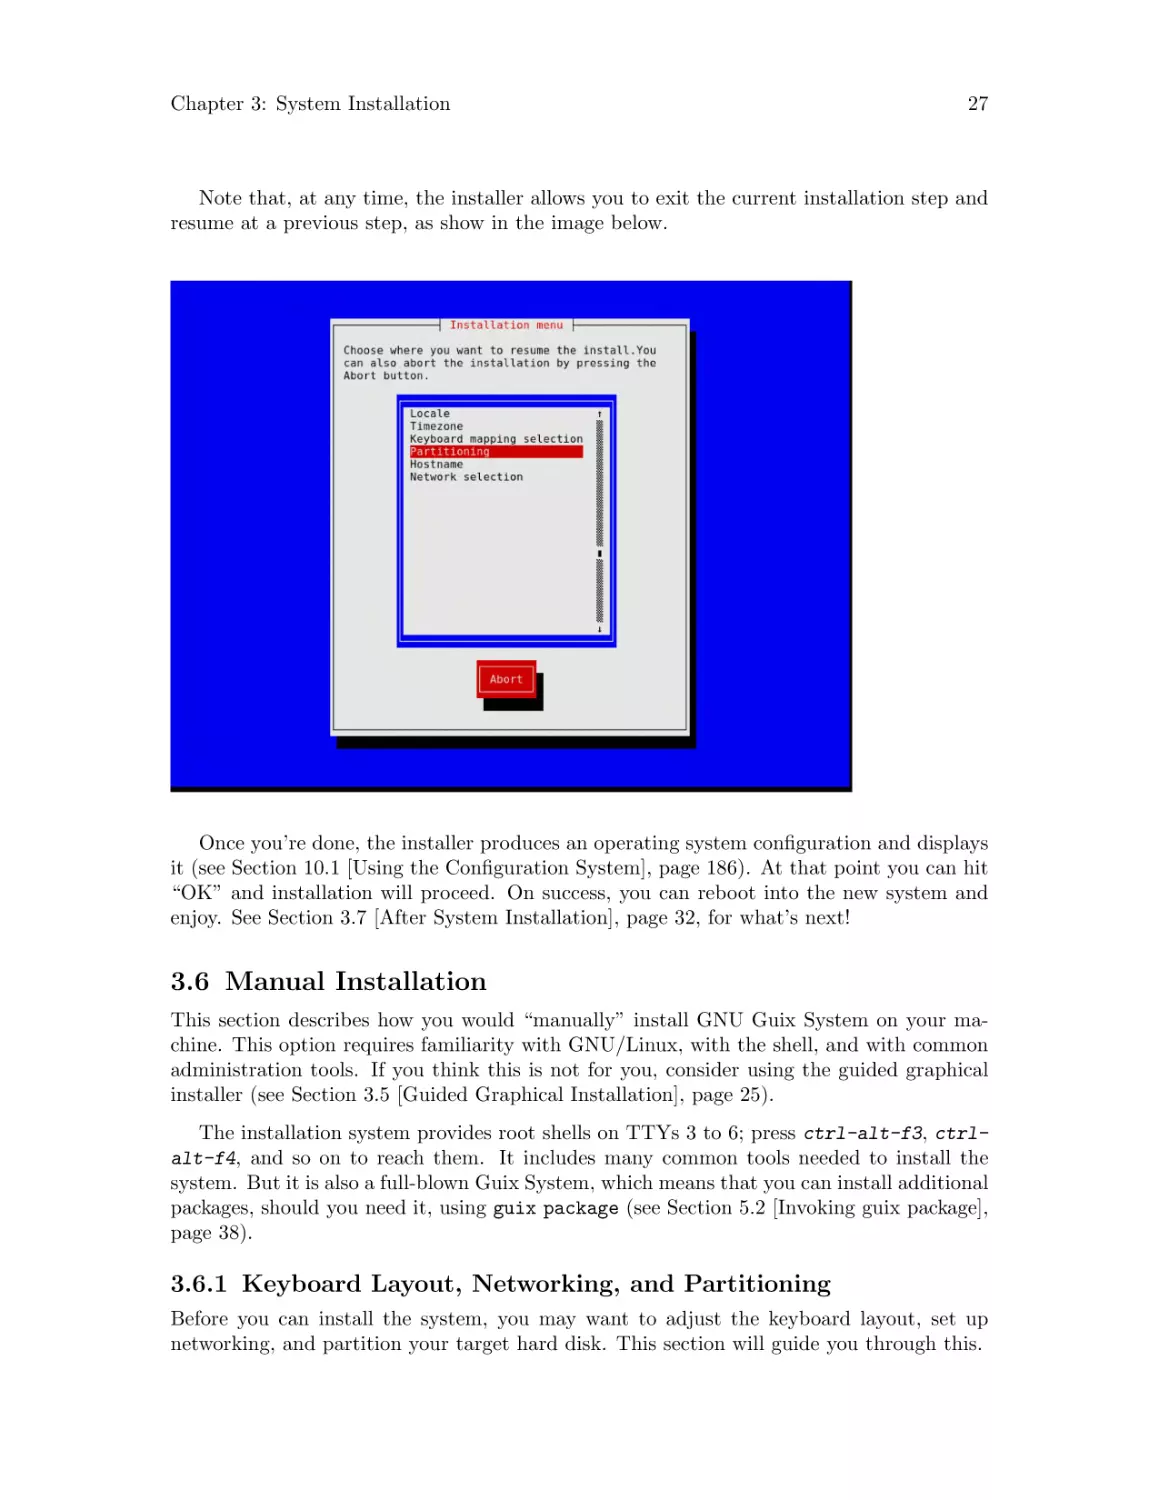 Manual Installation
Keyboard Layout, Networking, and Partitioning